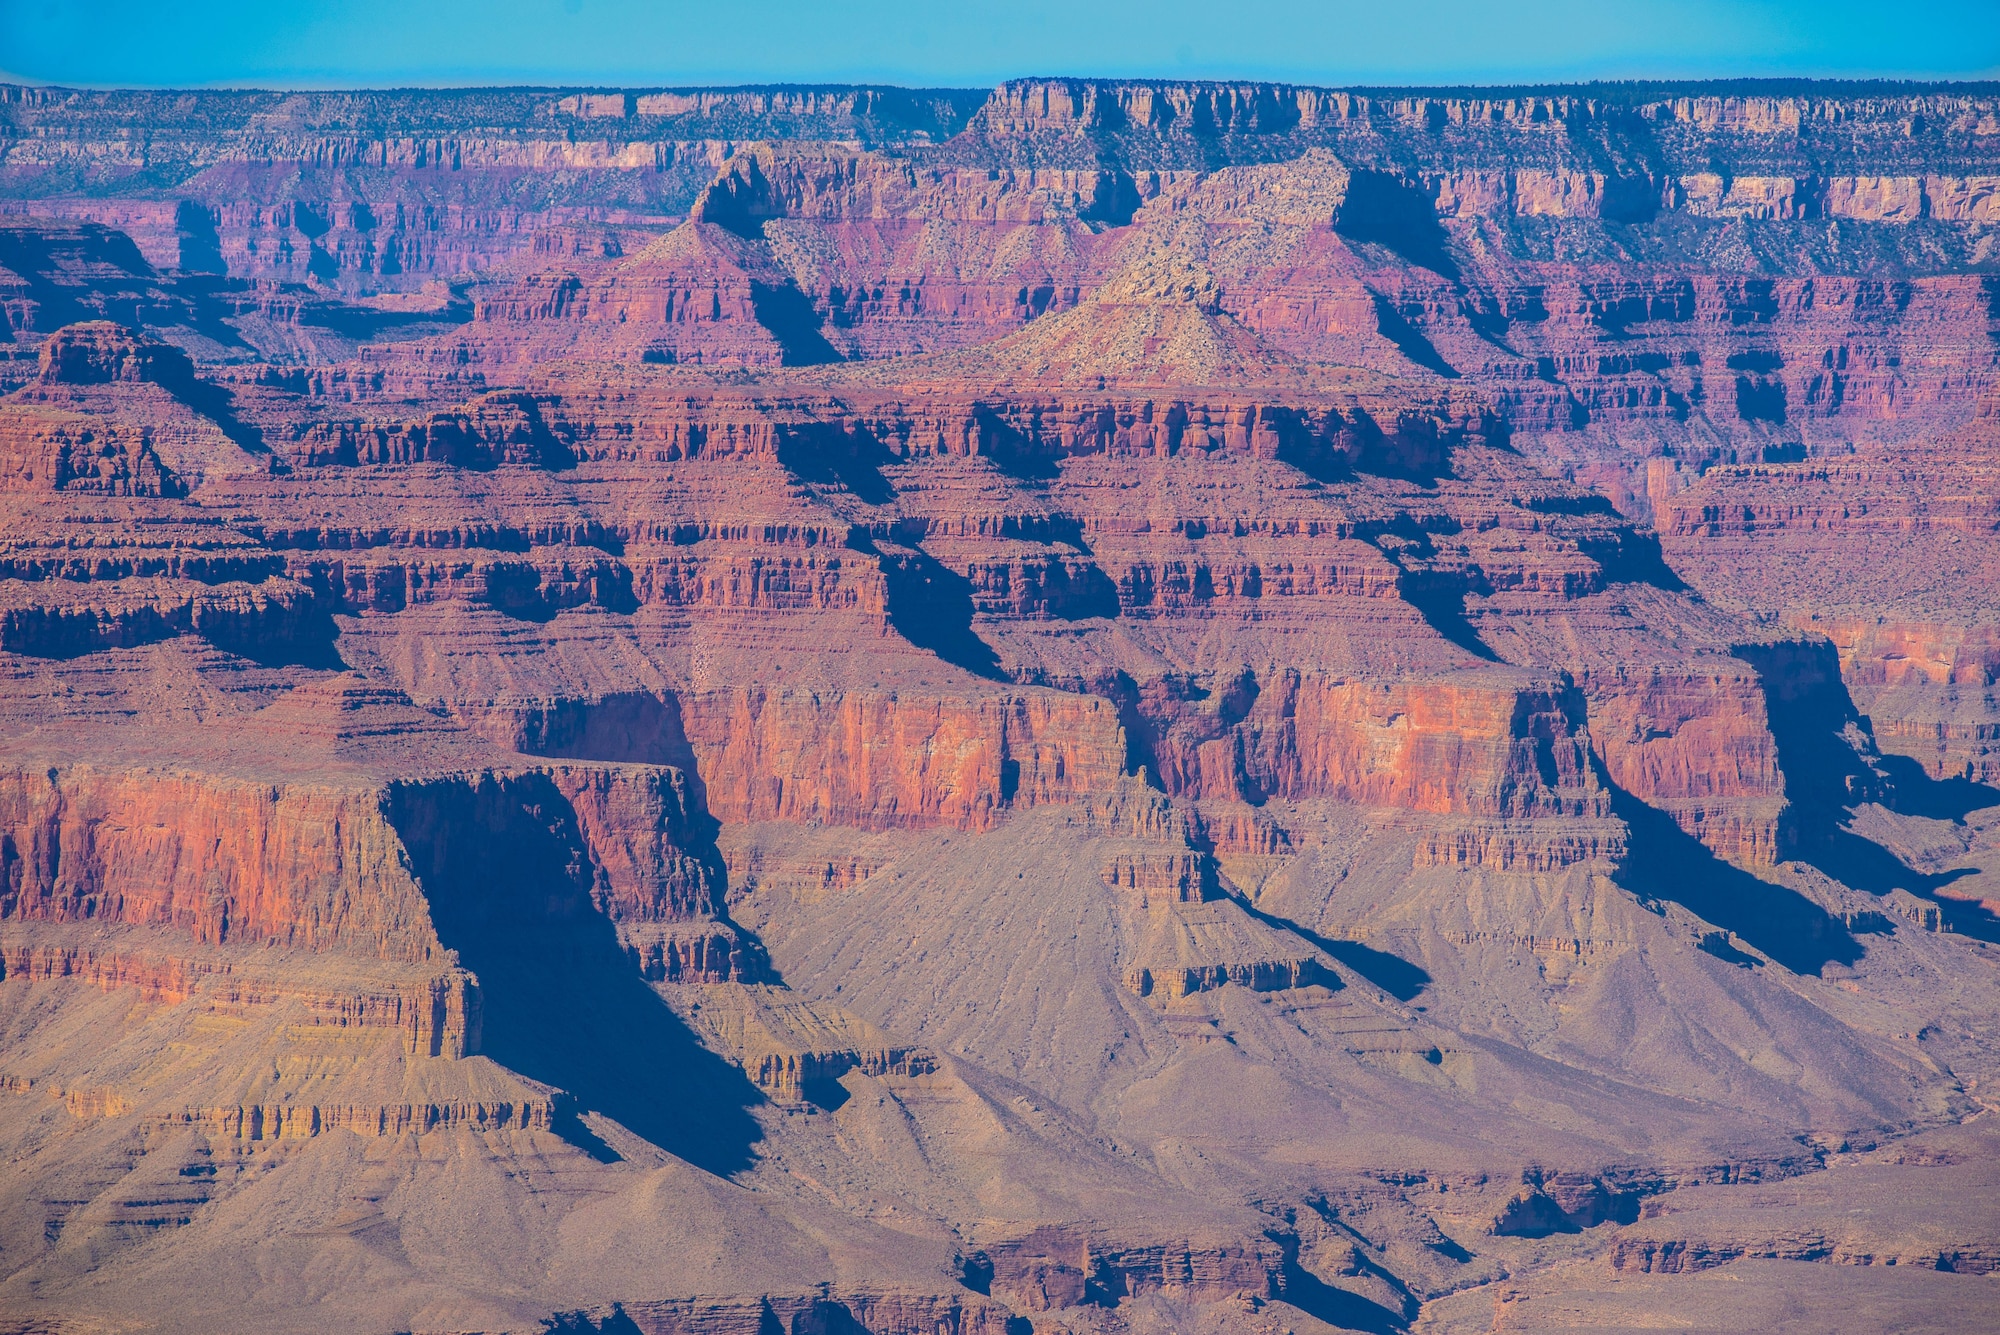 A close-up of the Grand Canyon is seen from Yavapi Point in Grand Canyon National Park, Ariz., Jan. 27, 2018. The Grand Canyon offers different amenities to Airmen and their families stationed at Luke Air Force Base to visit and experience. (U.S. Air Force photo/Airman 1st Class Caleb Worpel)